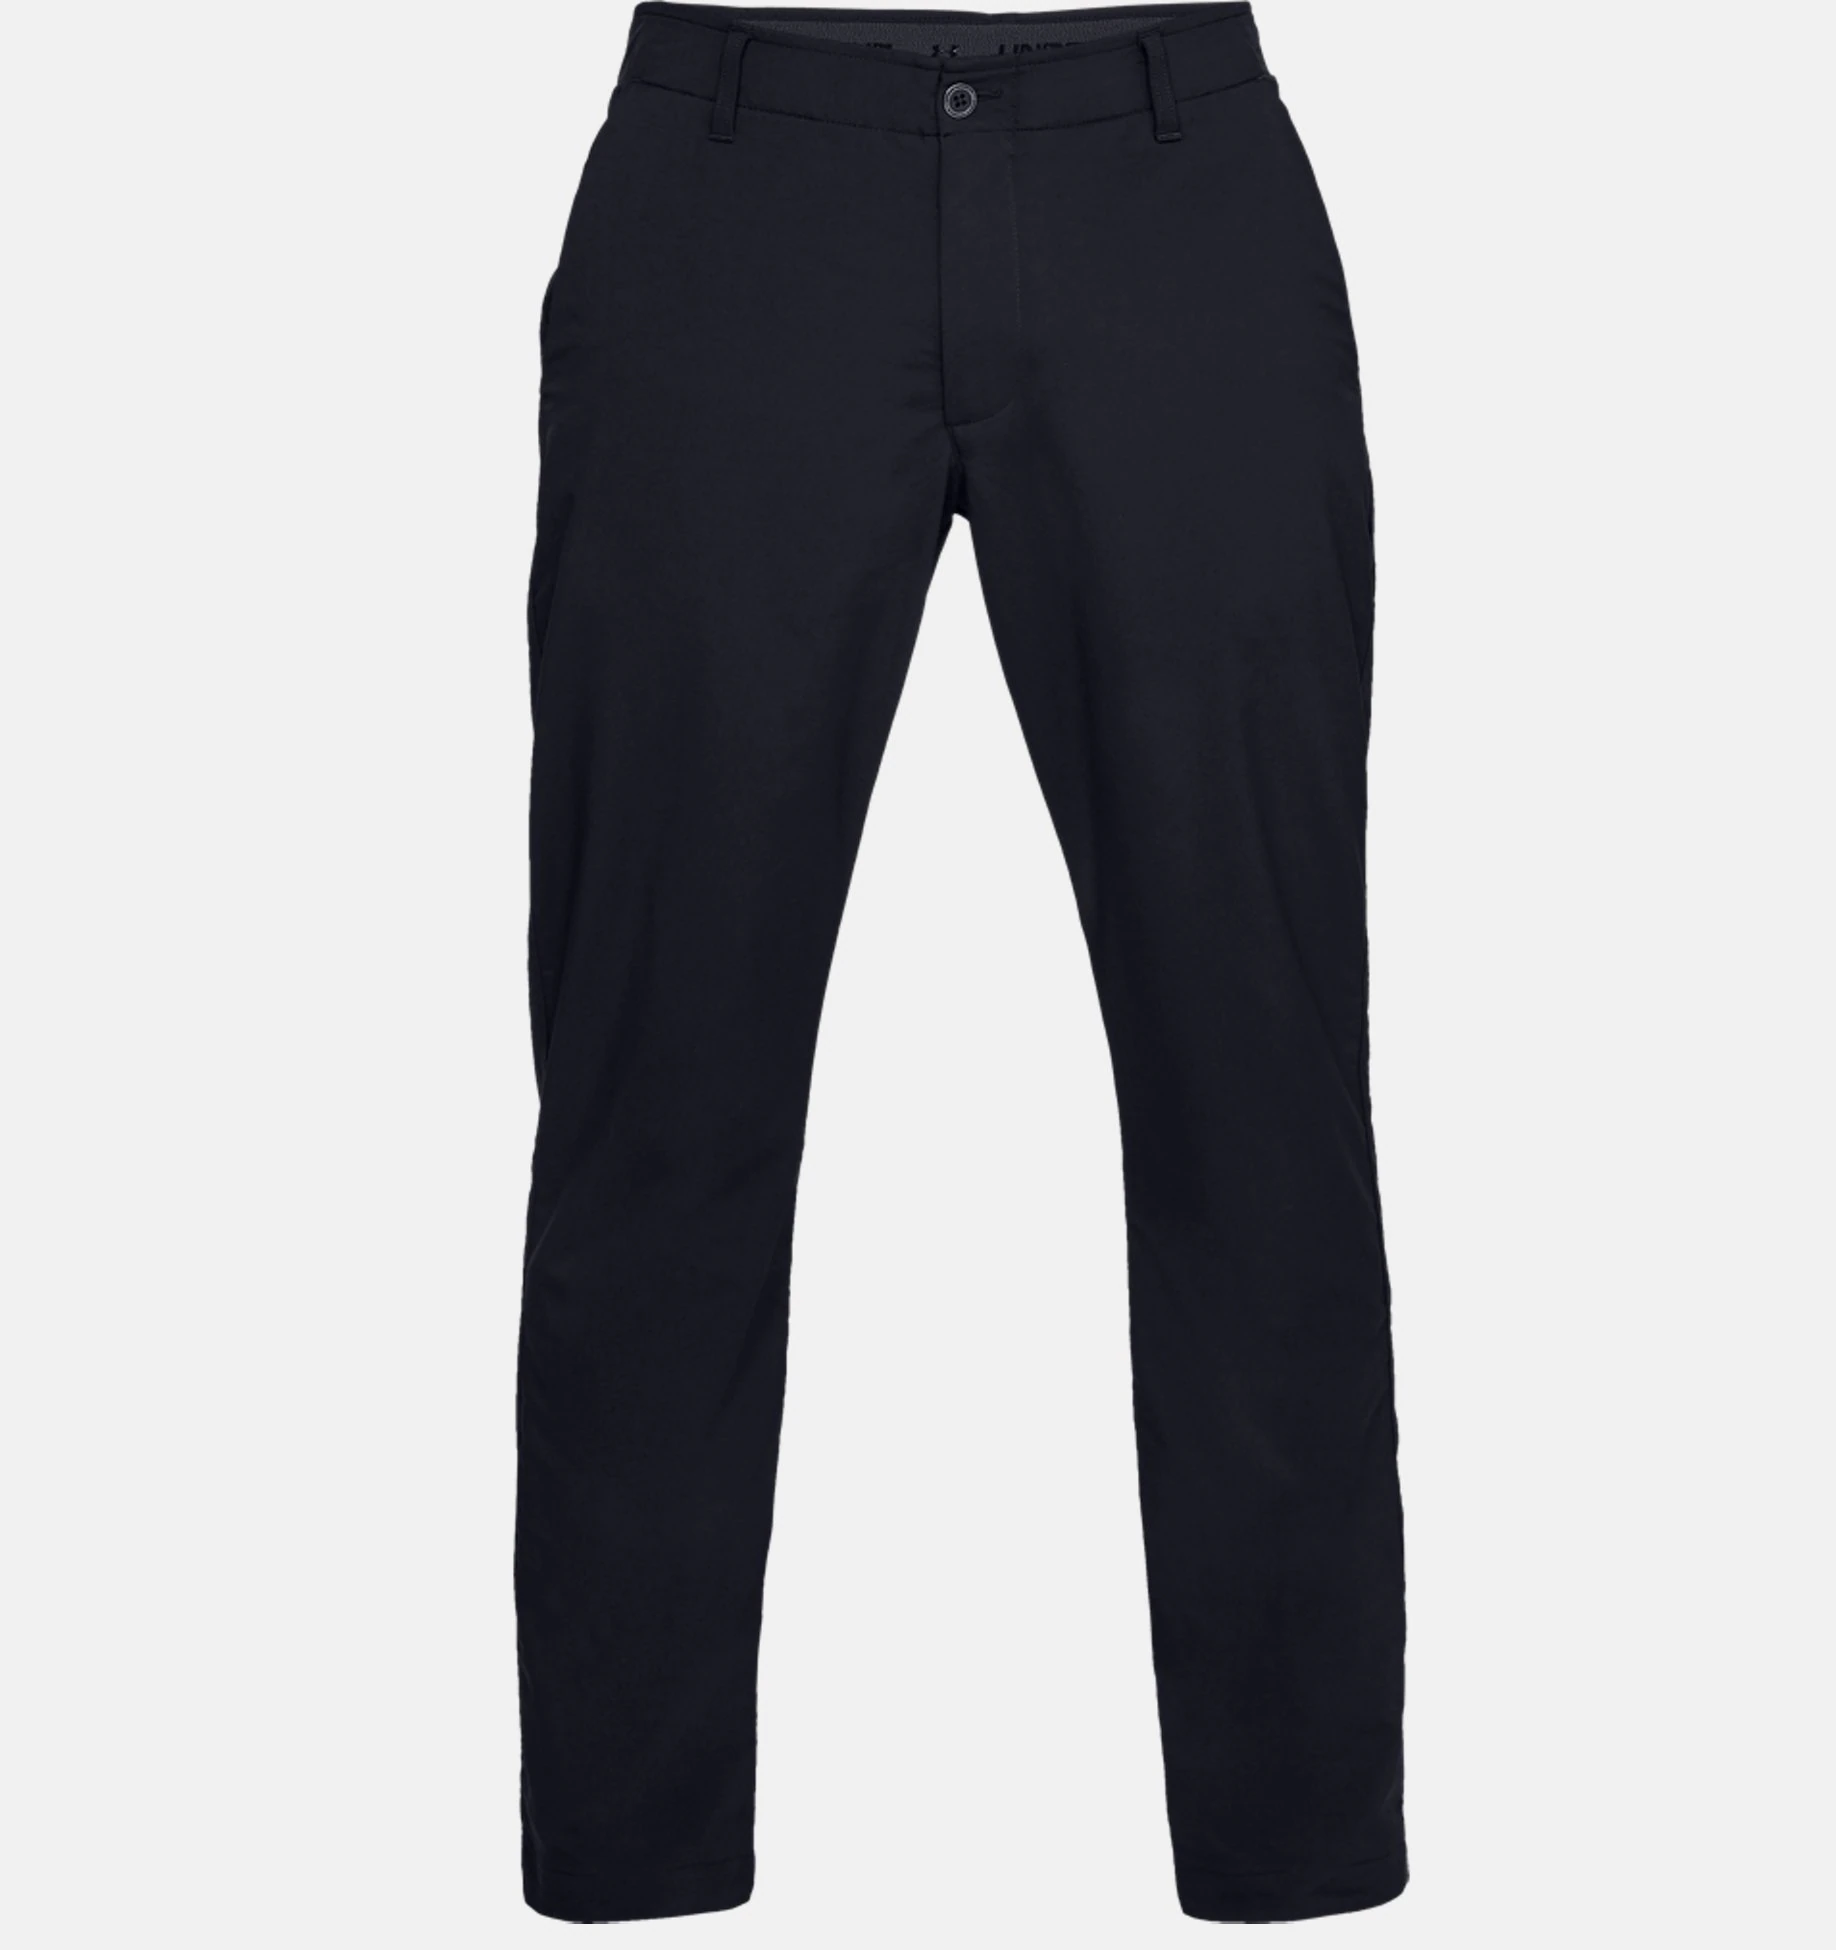 Under Armour EU Performance Taped Trouser in Black #1331186 category image